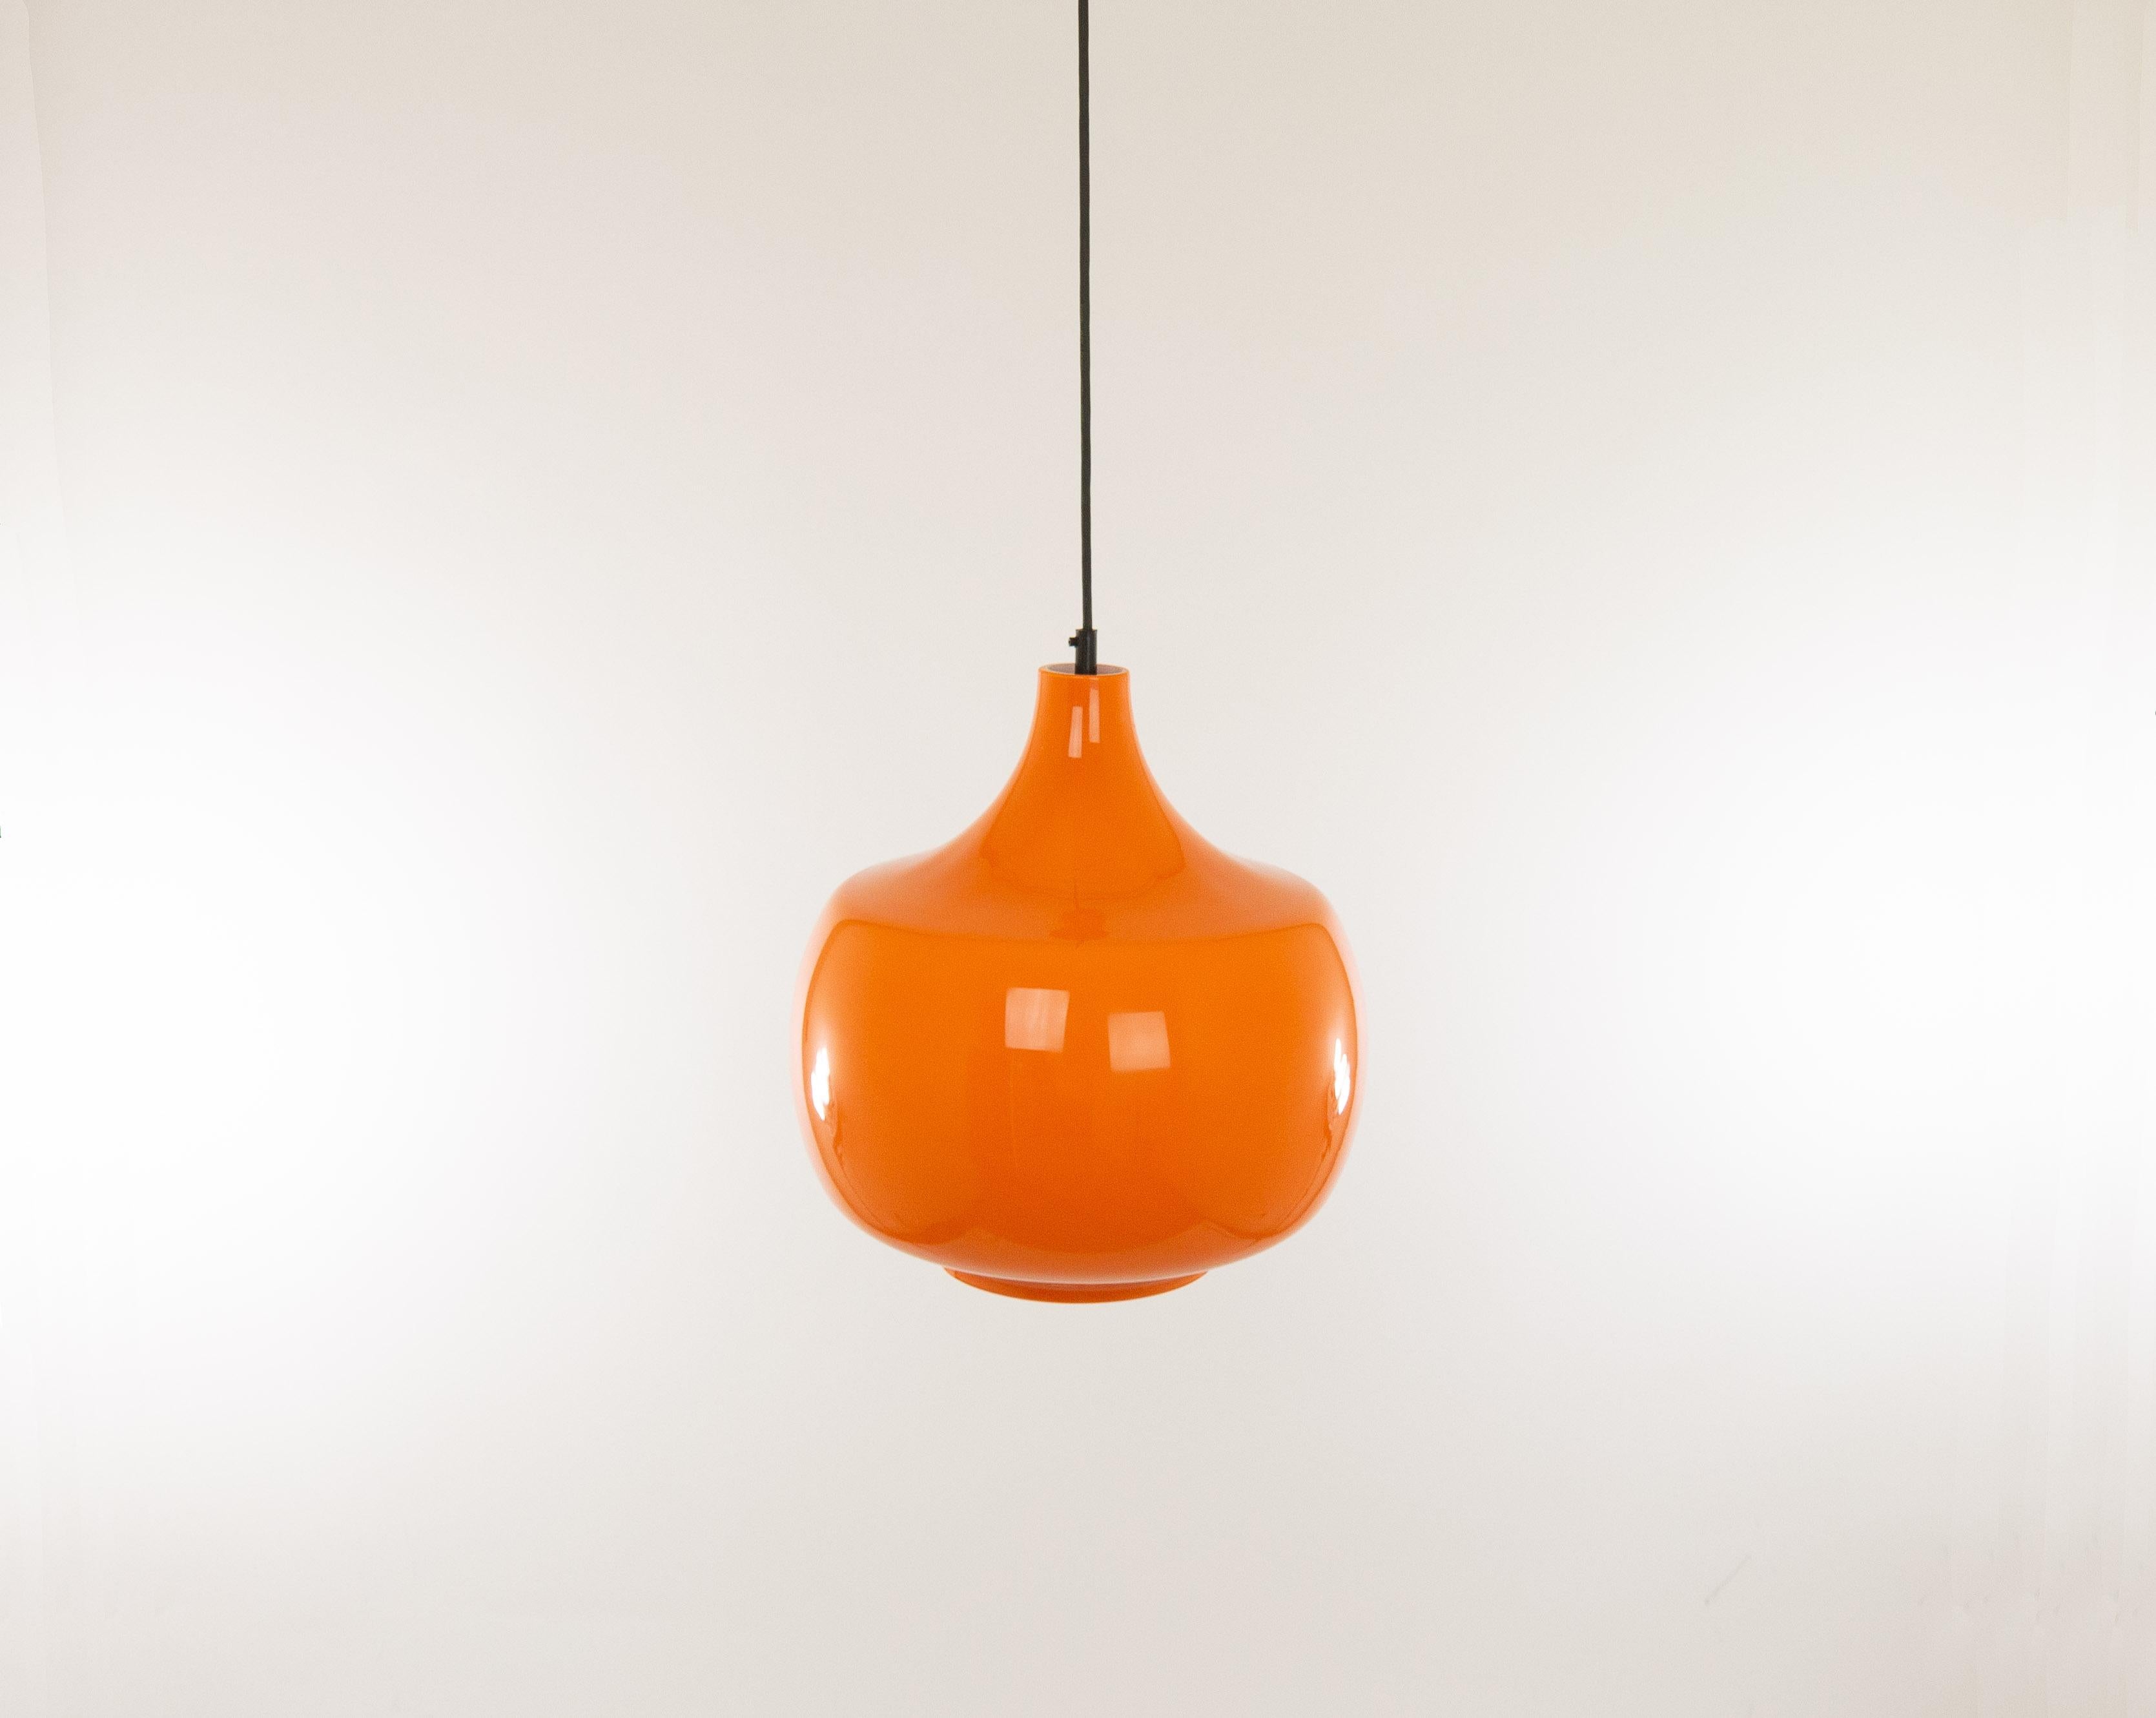 Hand blown orange Murano glass pendant manufactured by Murano glass specialist Venini.

The lamp has never been used (New Old Stock) and is therefore in excellent condition.

The internal suspension is equipped with rubber (original) so it